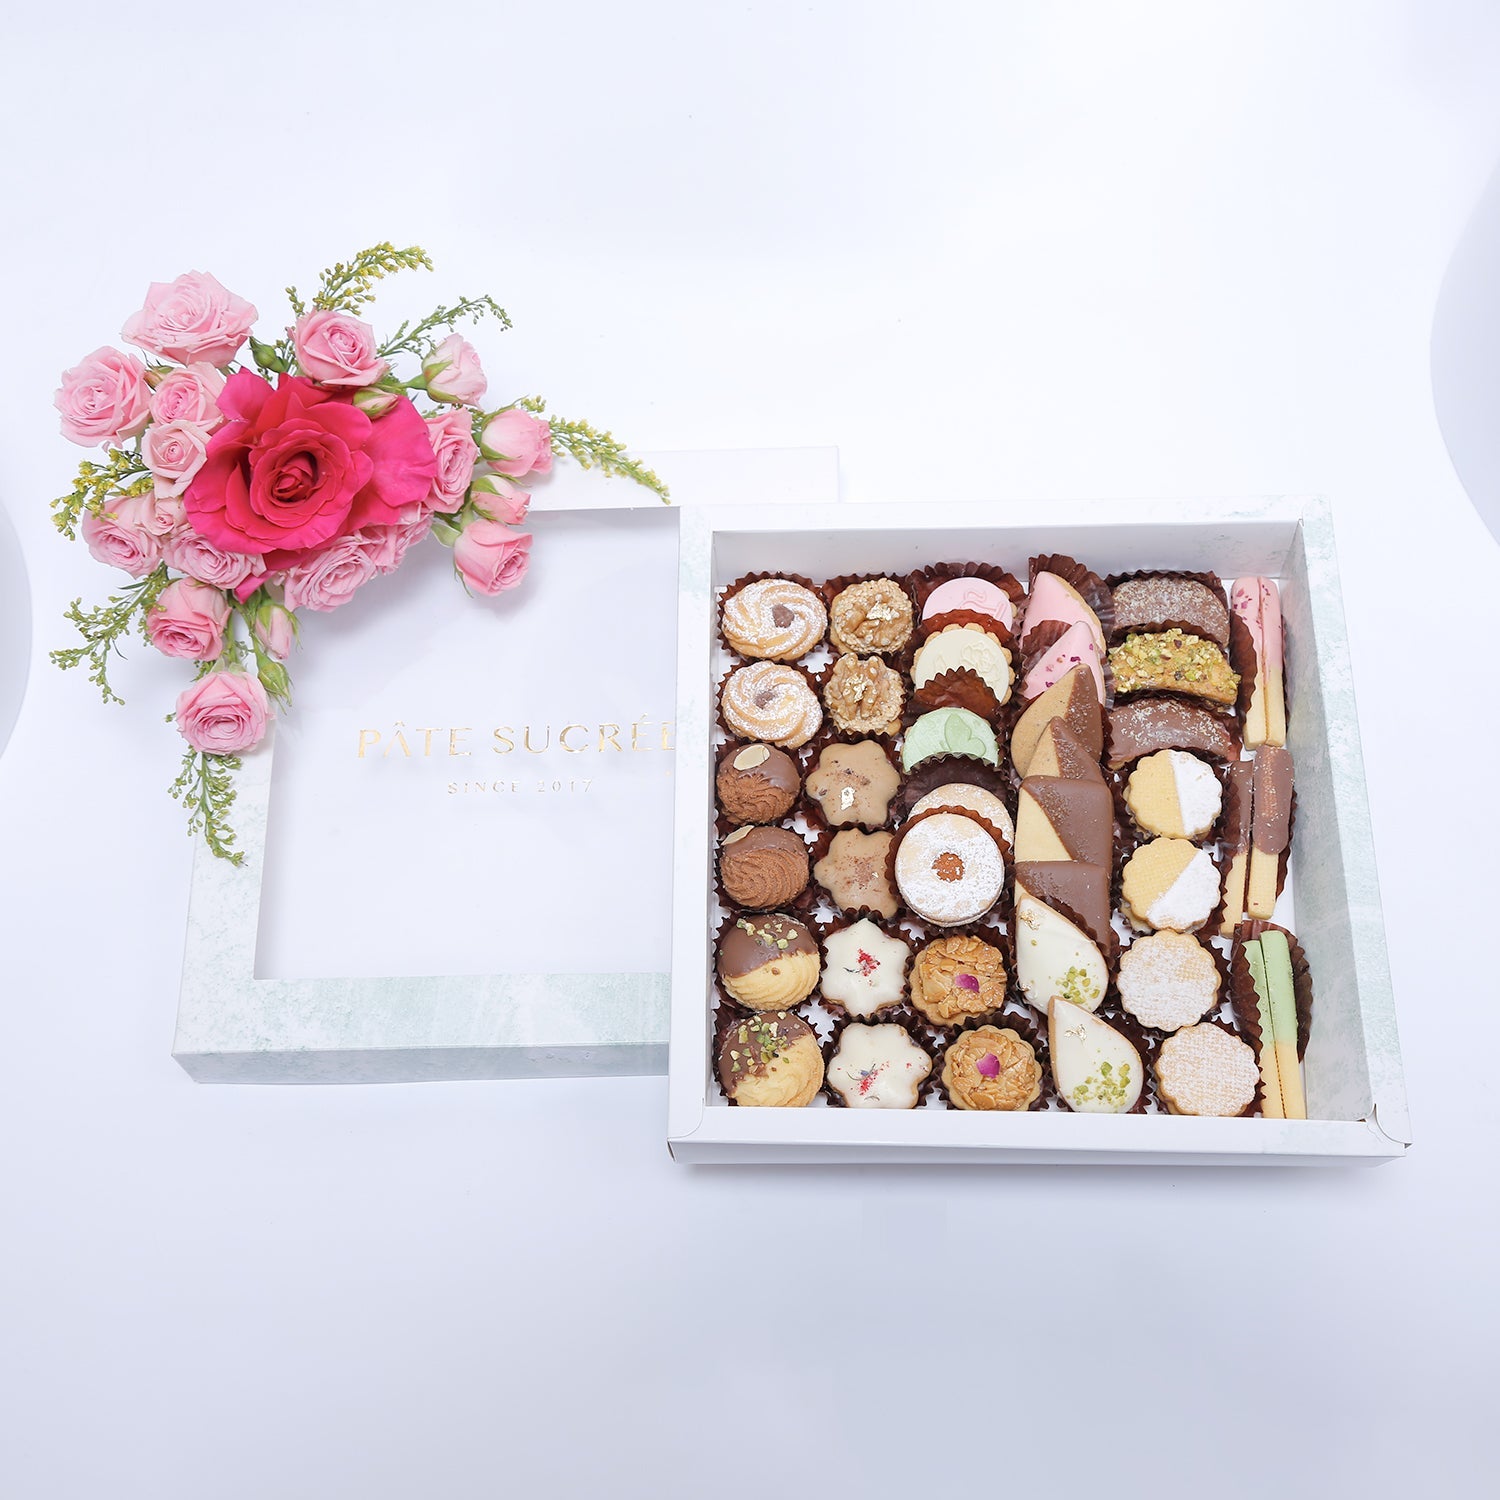 Mix Sweets Box and Flowers